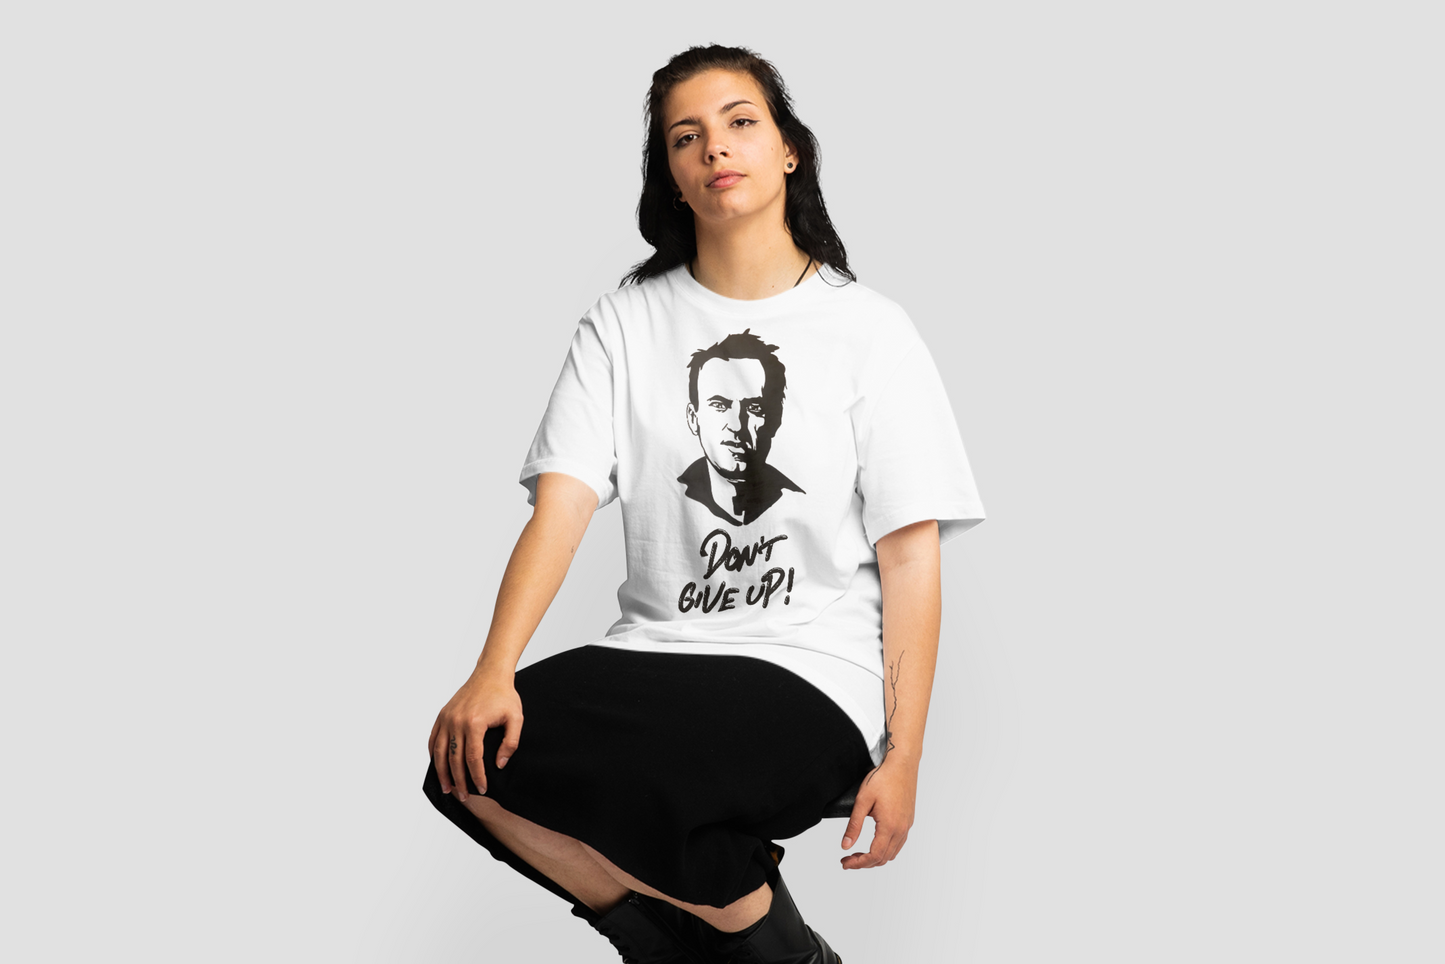 Alexei Navalny Don't Give Up Women's T-Shirt